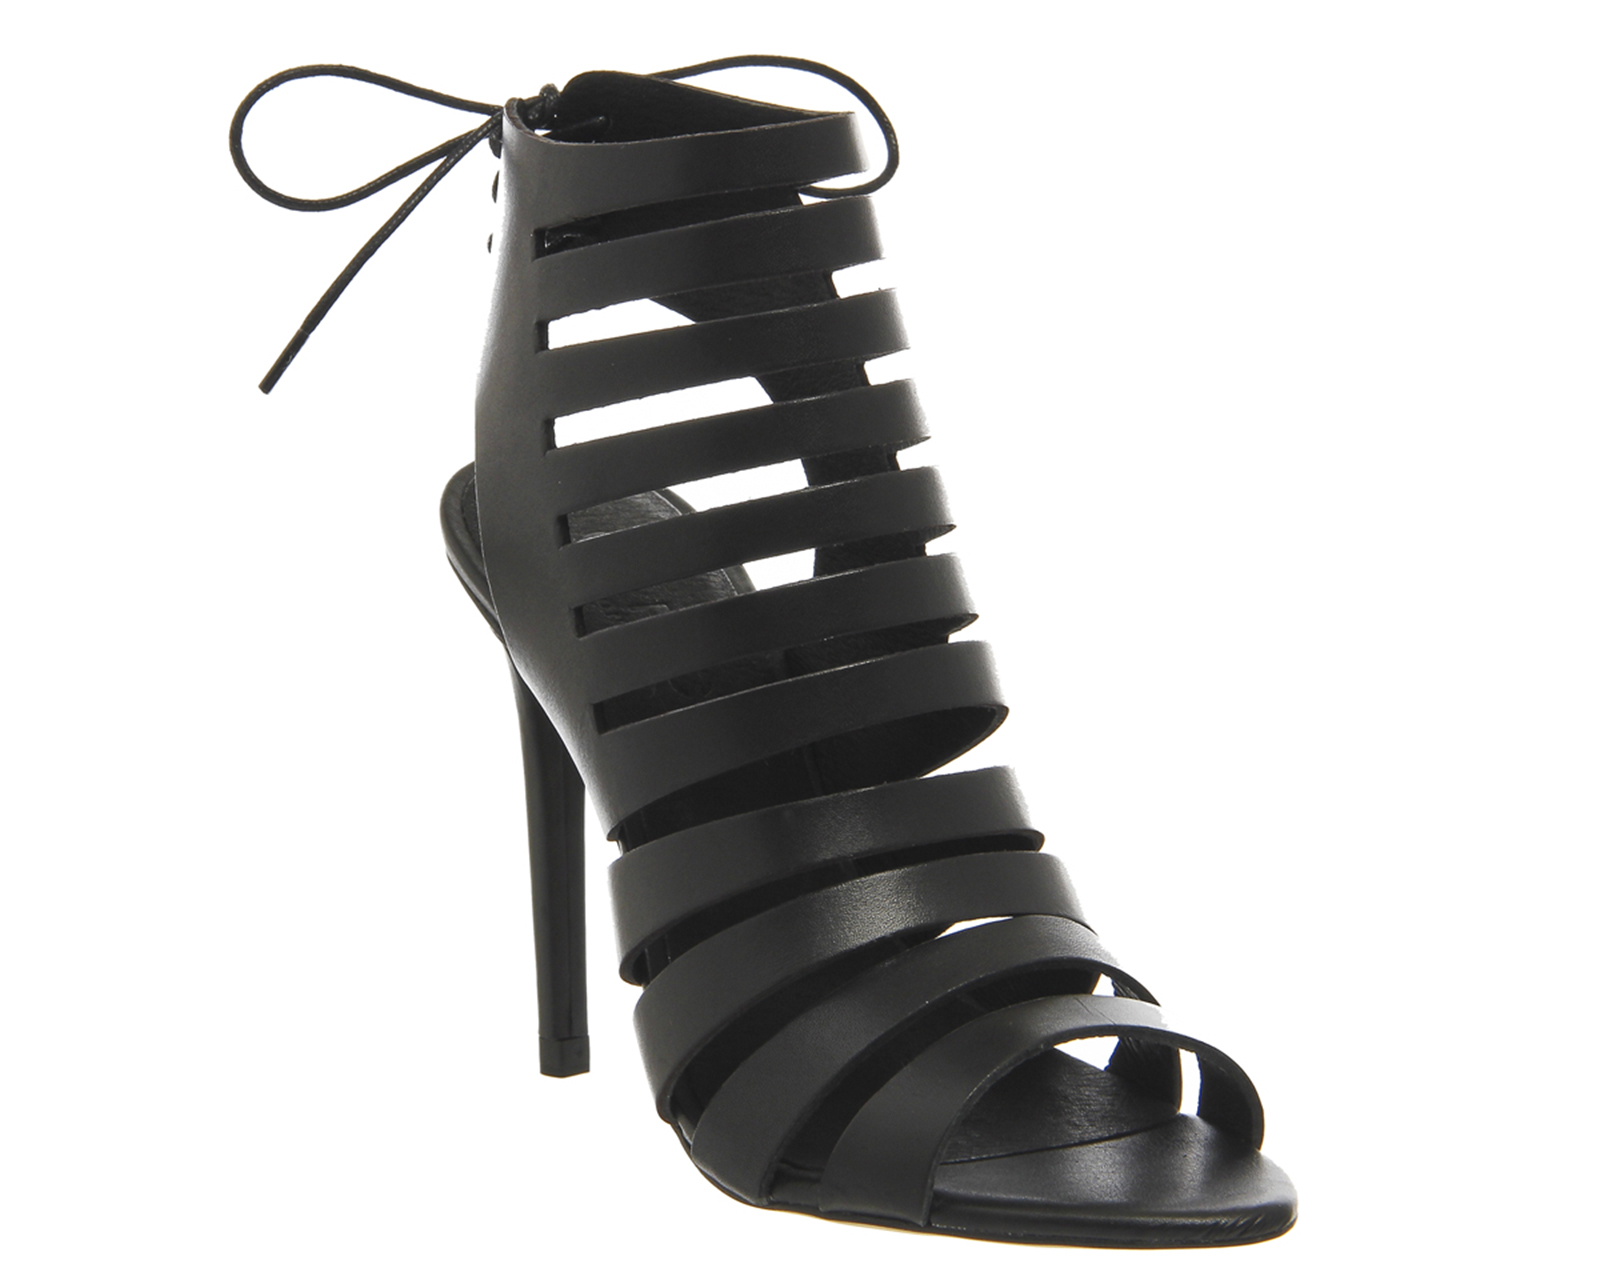 OFFICETangle Strappy Cut Out HeelsBlack Leather